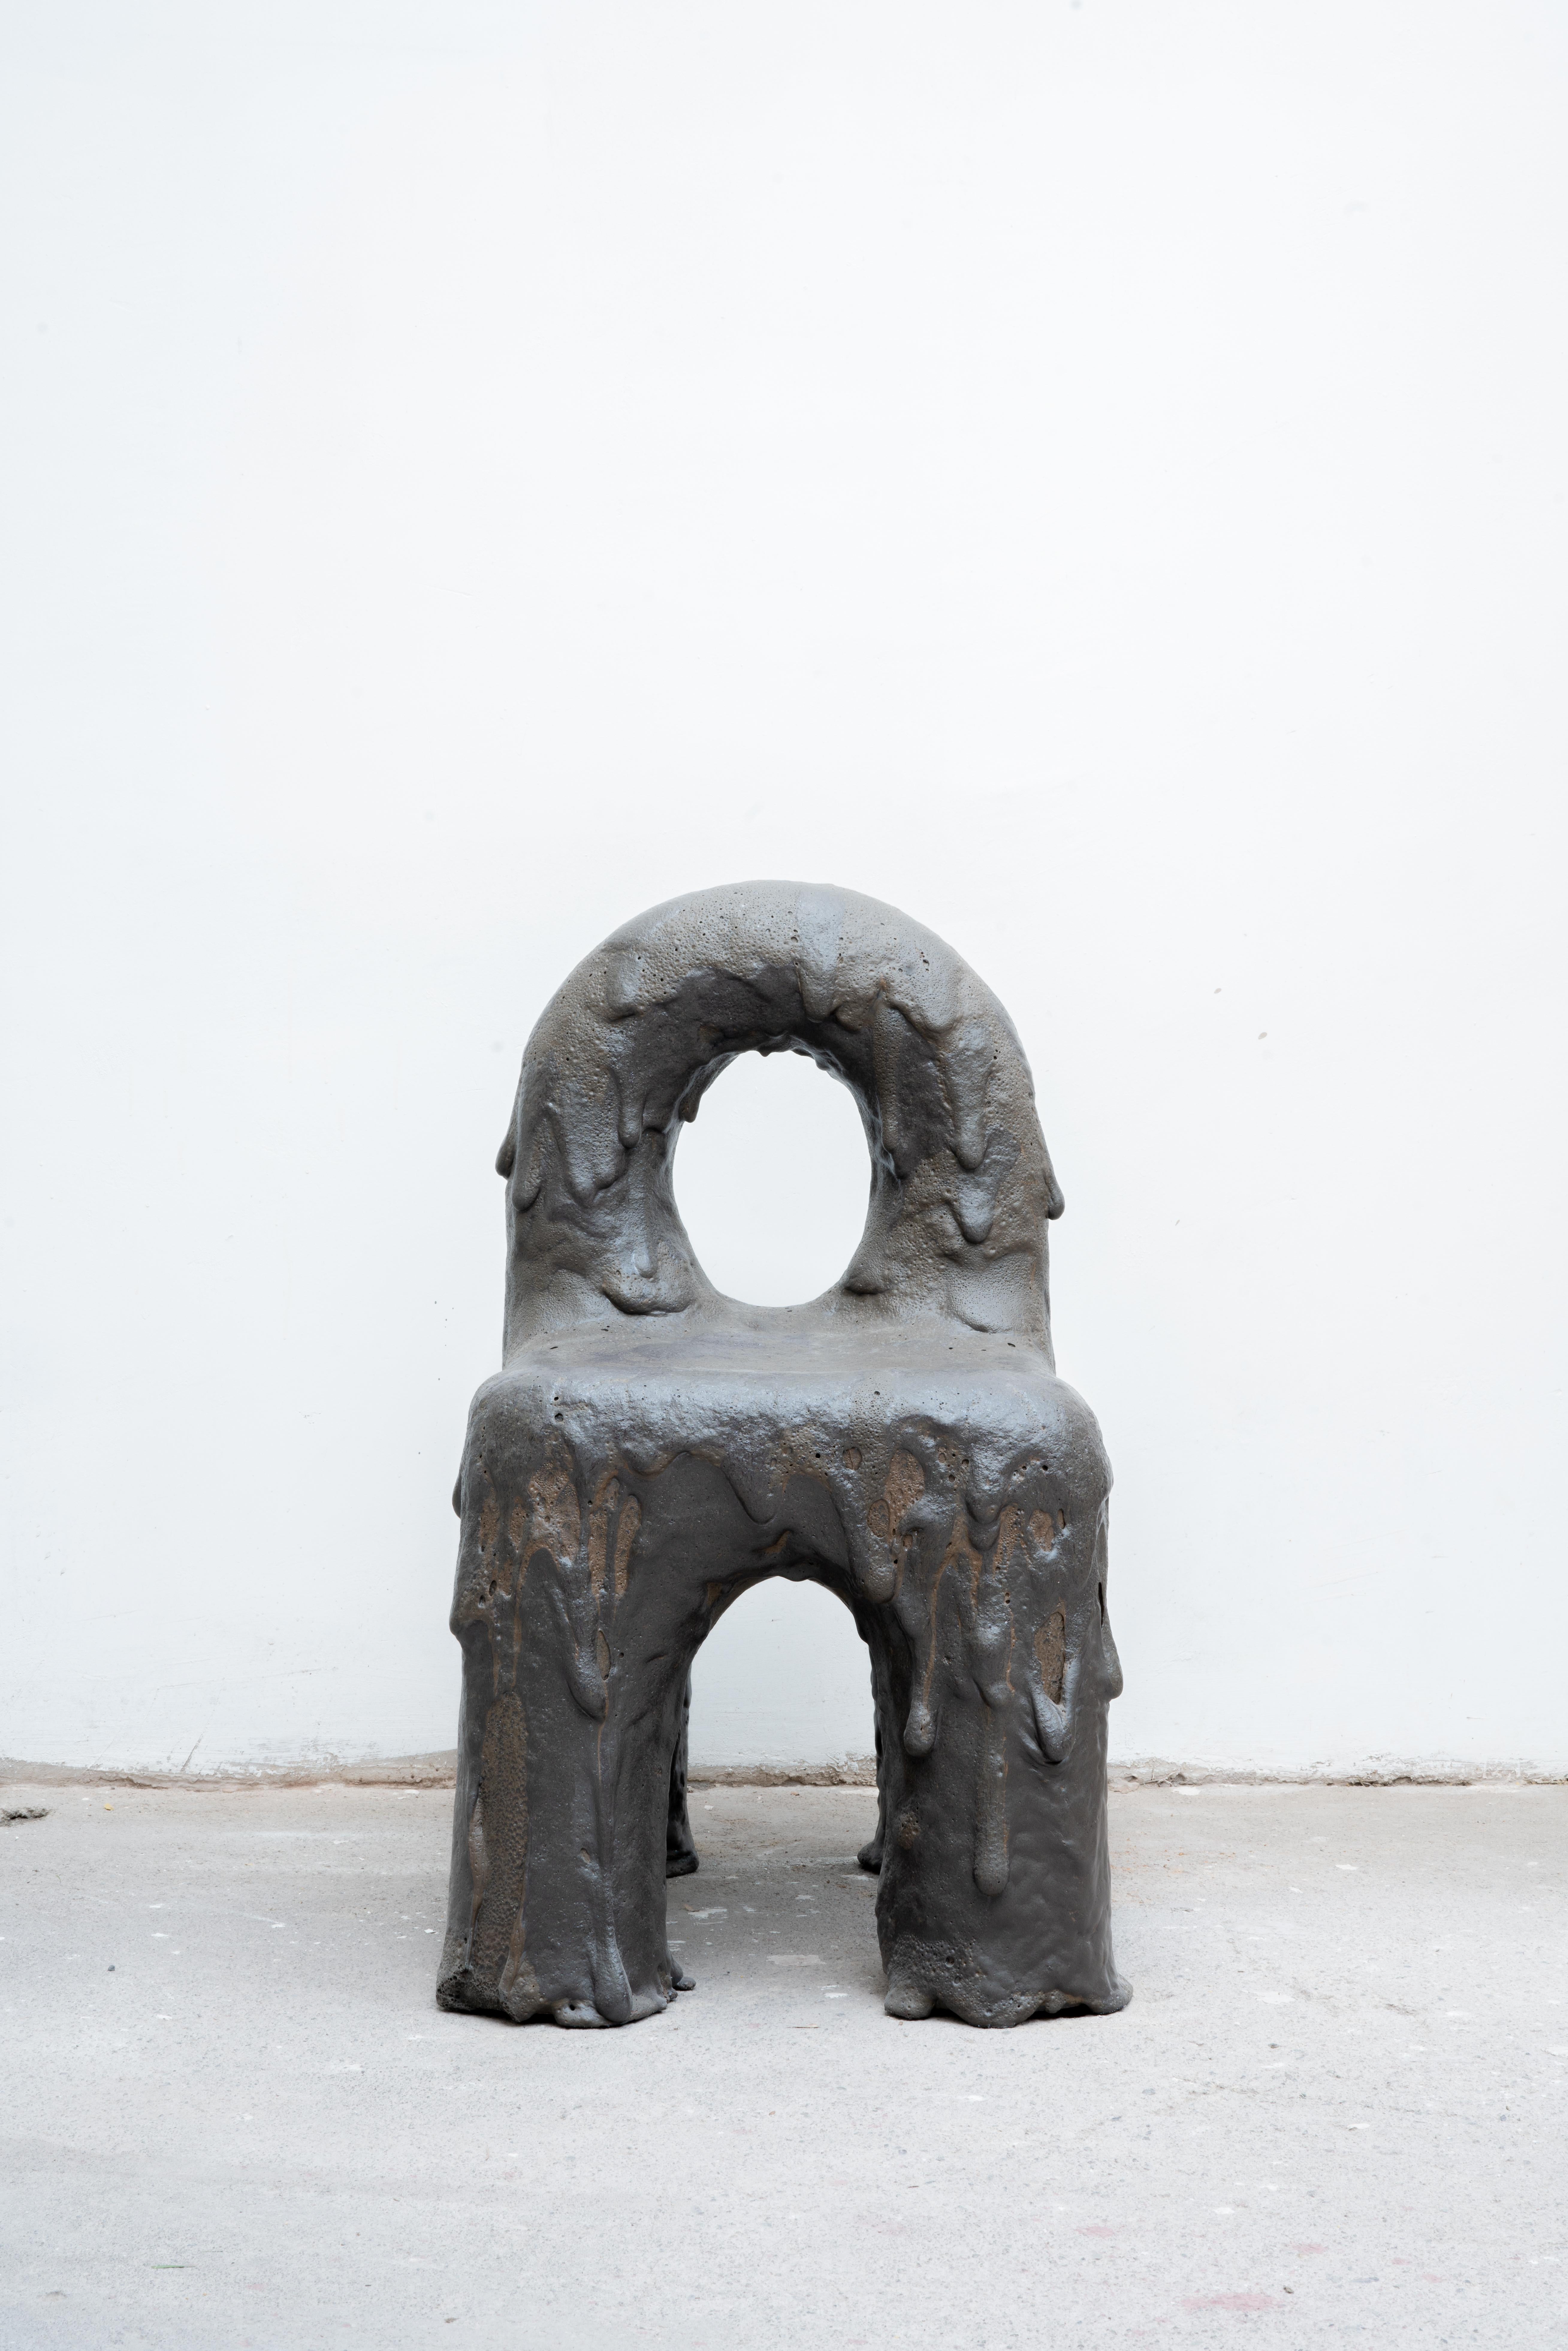 gt2P (Great Things to People)
Remolten N1: Monolita Chair 15, Quitralco, Osorno Volcano, April 23rd, 2019
Stoneware structure, volcanic lava
Measures: 33 x 17.75 x 23.5 inches
84 x 45 x 60 cm

gt2P (Great Things to People) is a Chilean design,